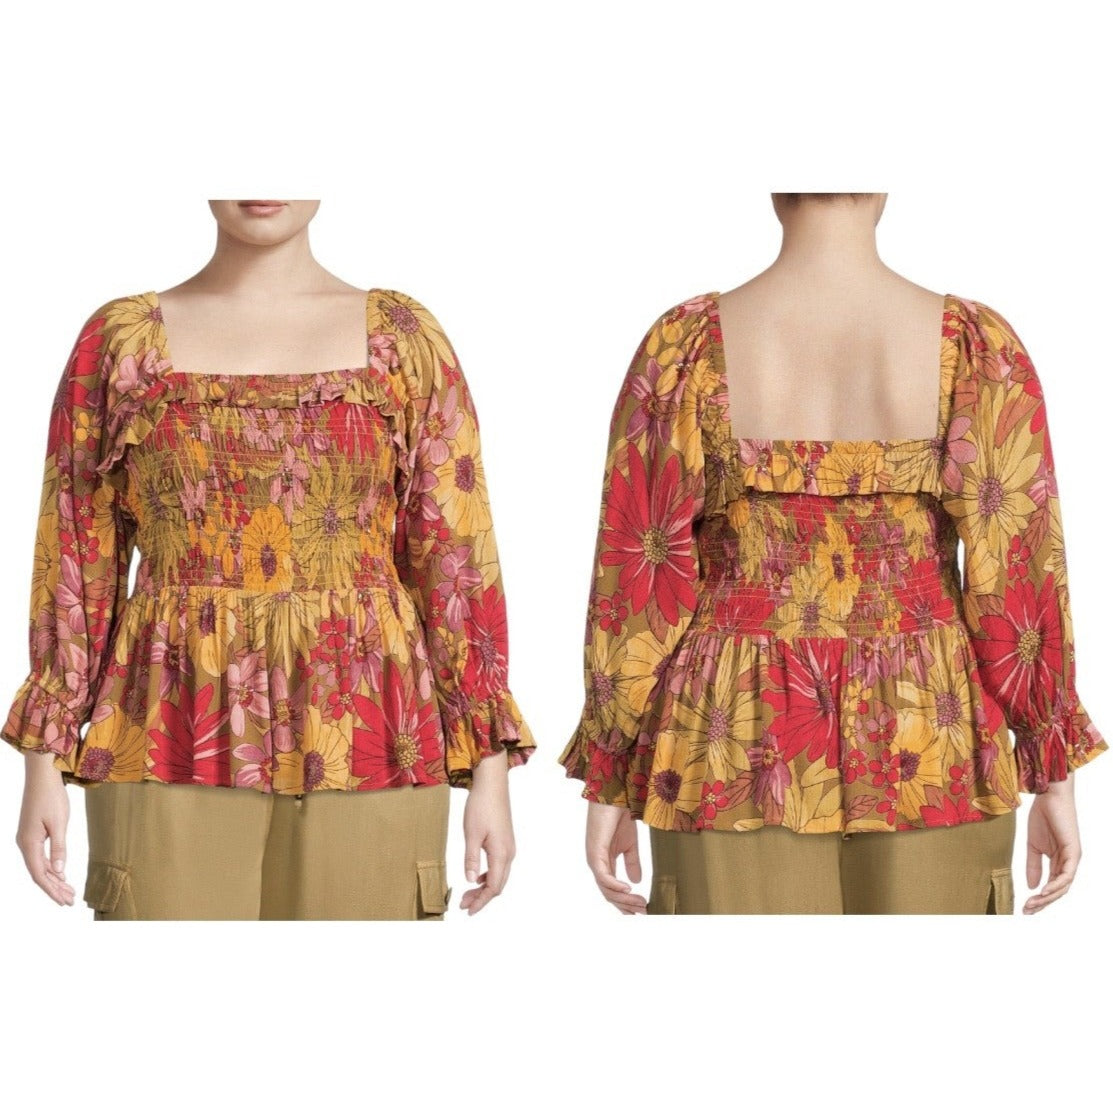 NWT Romantic Gypsy Women's Plus Size Square Neck Top Long Sleeve Floral, Size 4X